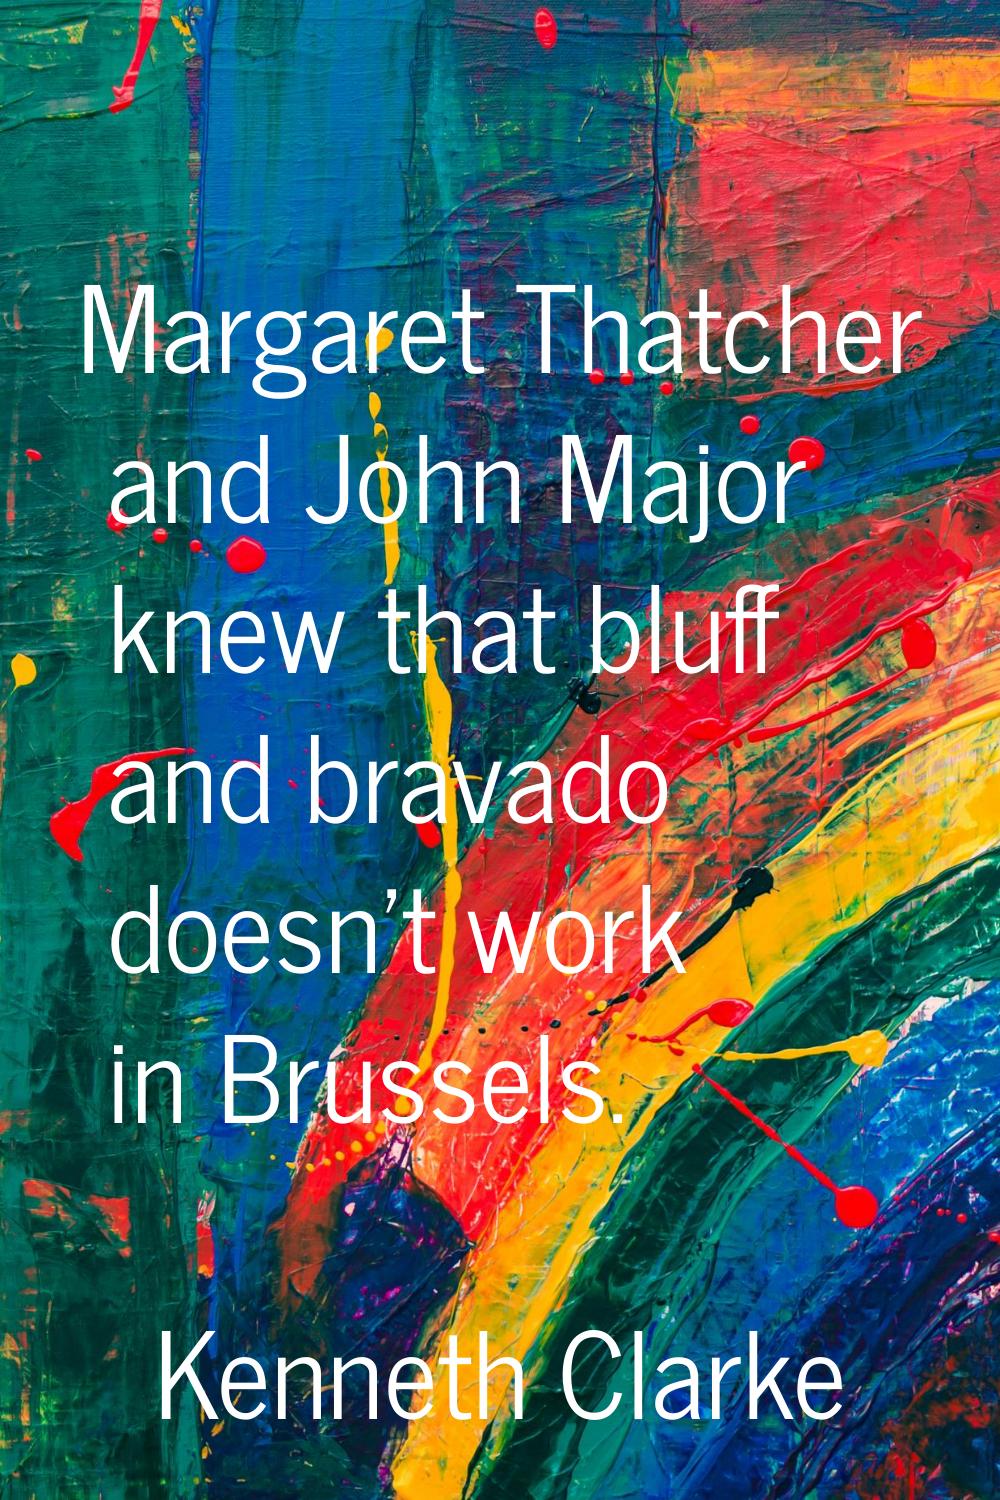 Margaret Thatcher and John Major knew that bluff and bravado doesn't work in Brussels.